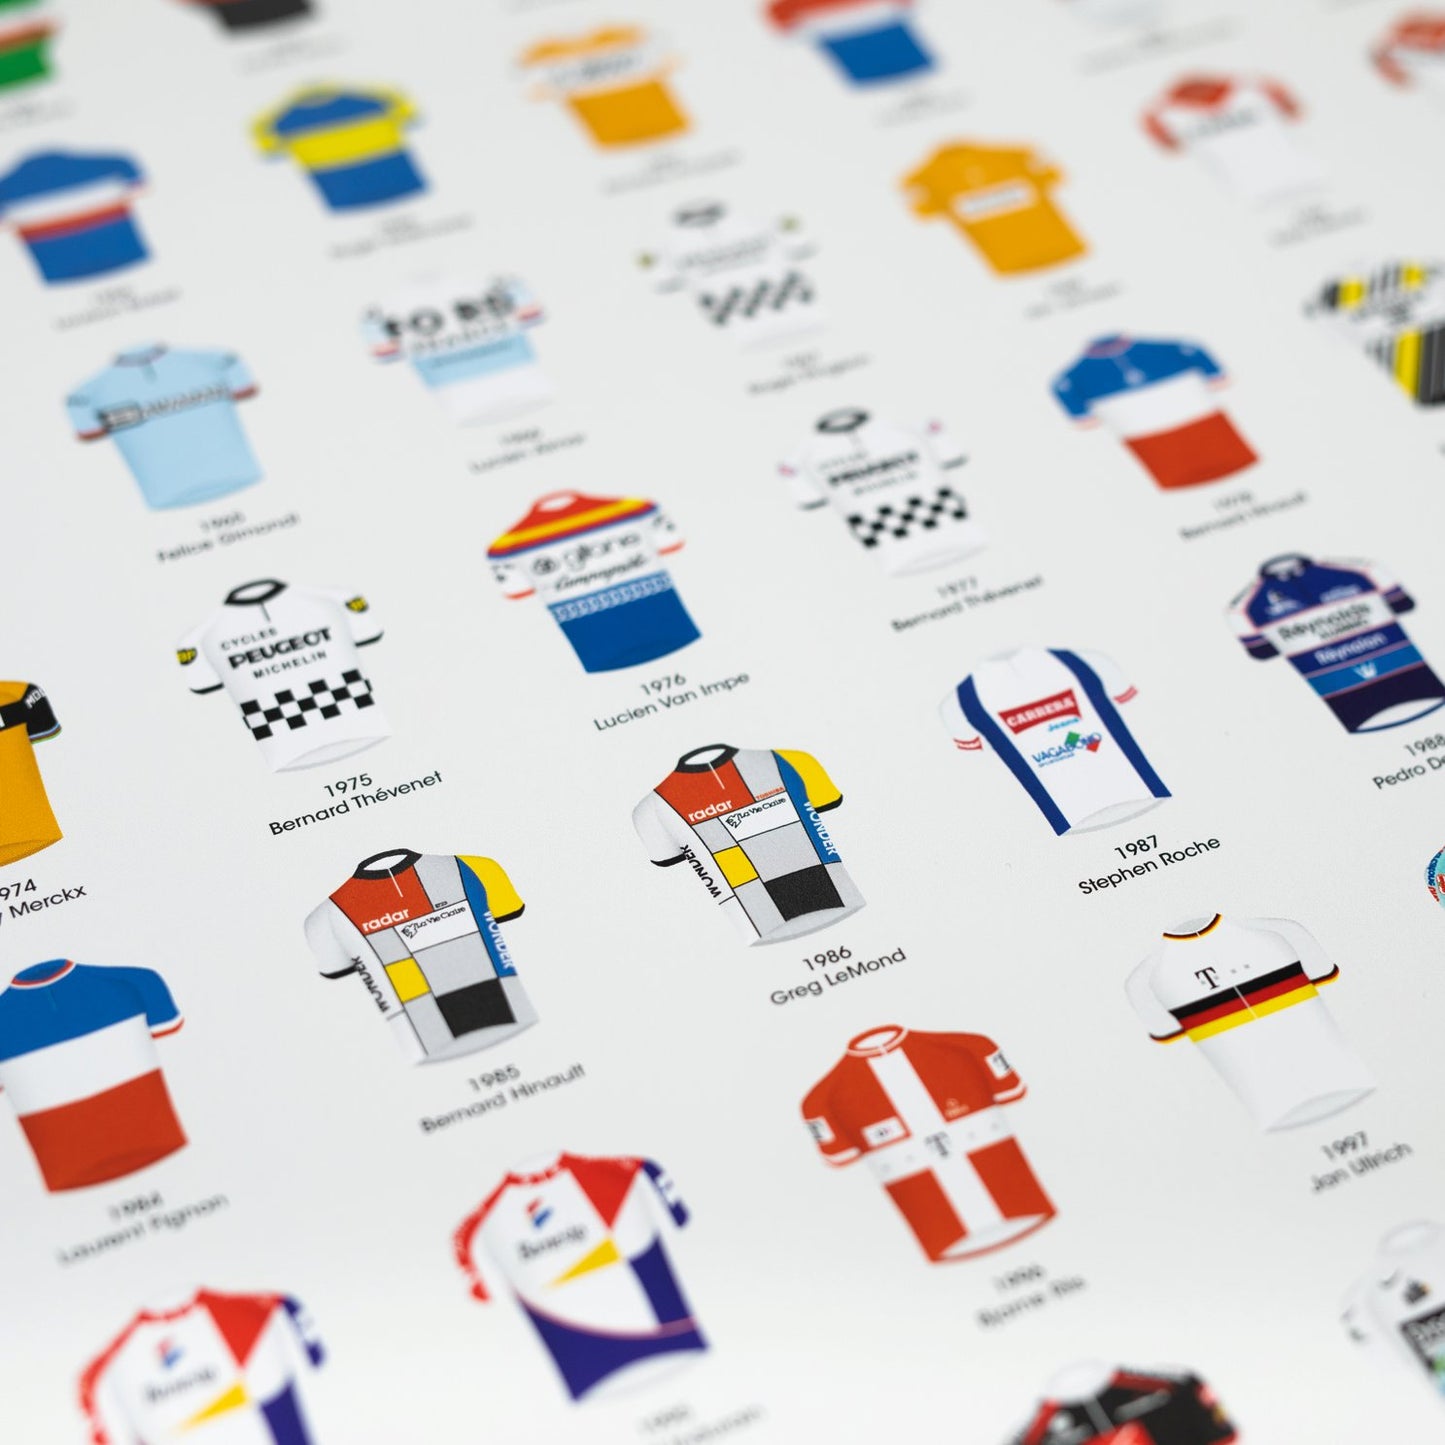 Tour de France Winners – Poster – The English Cyclist